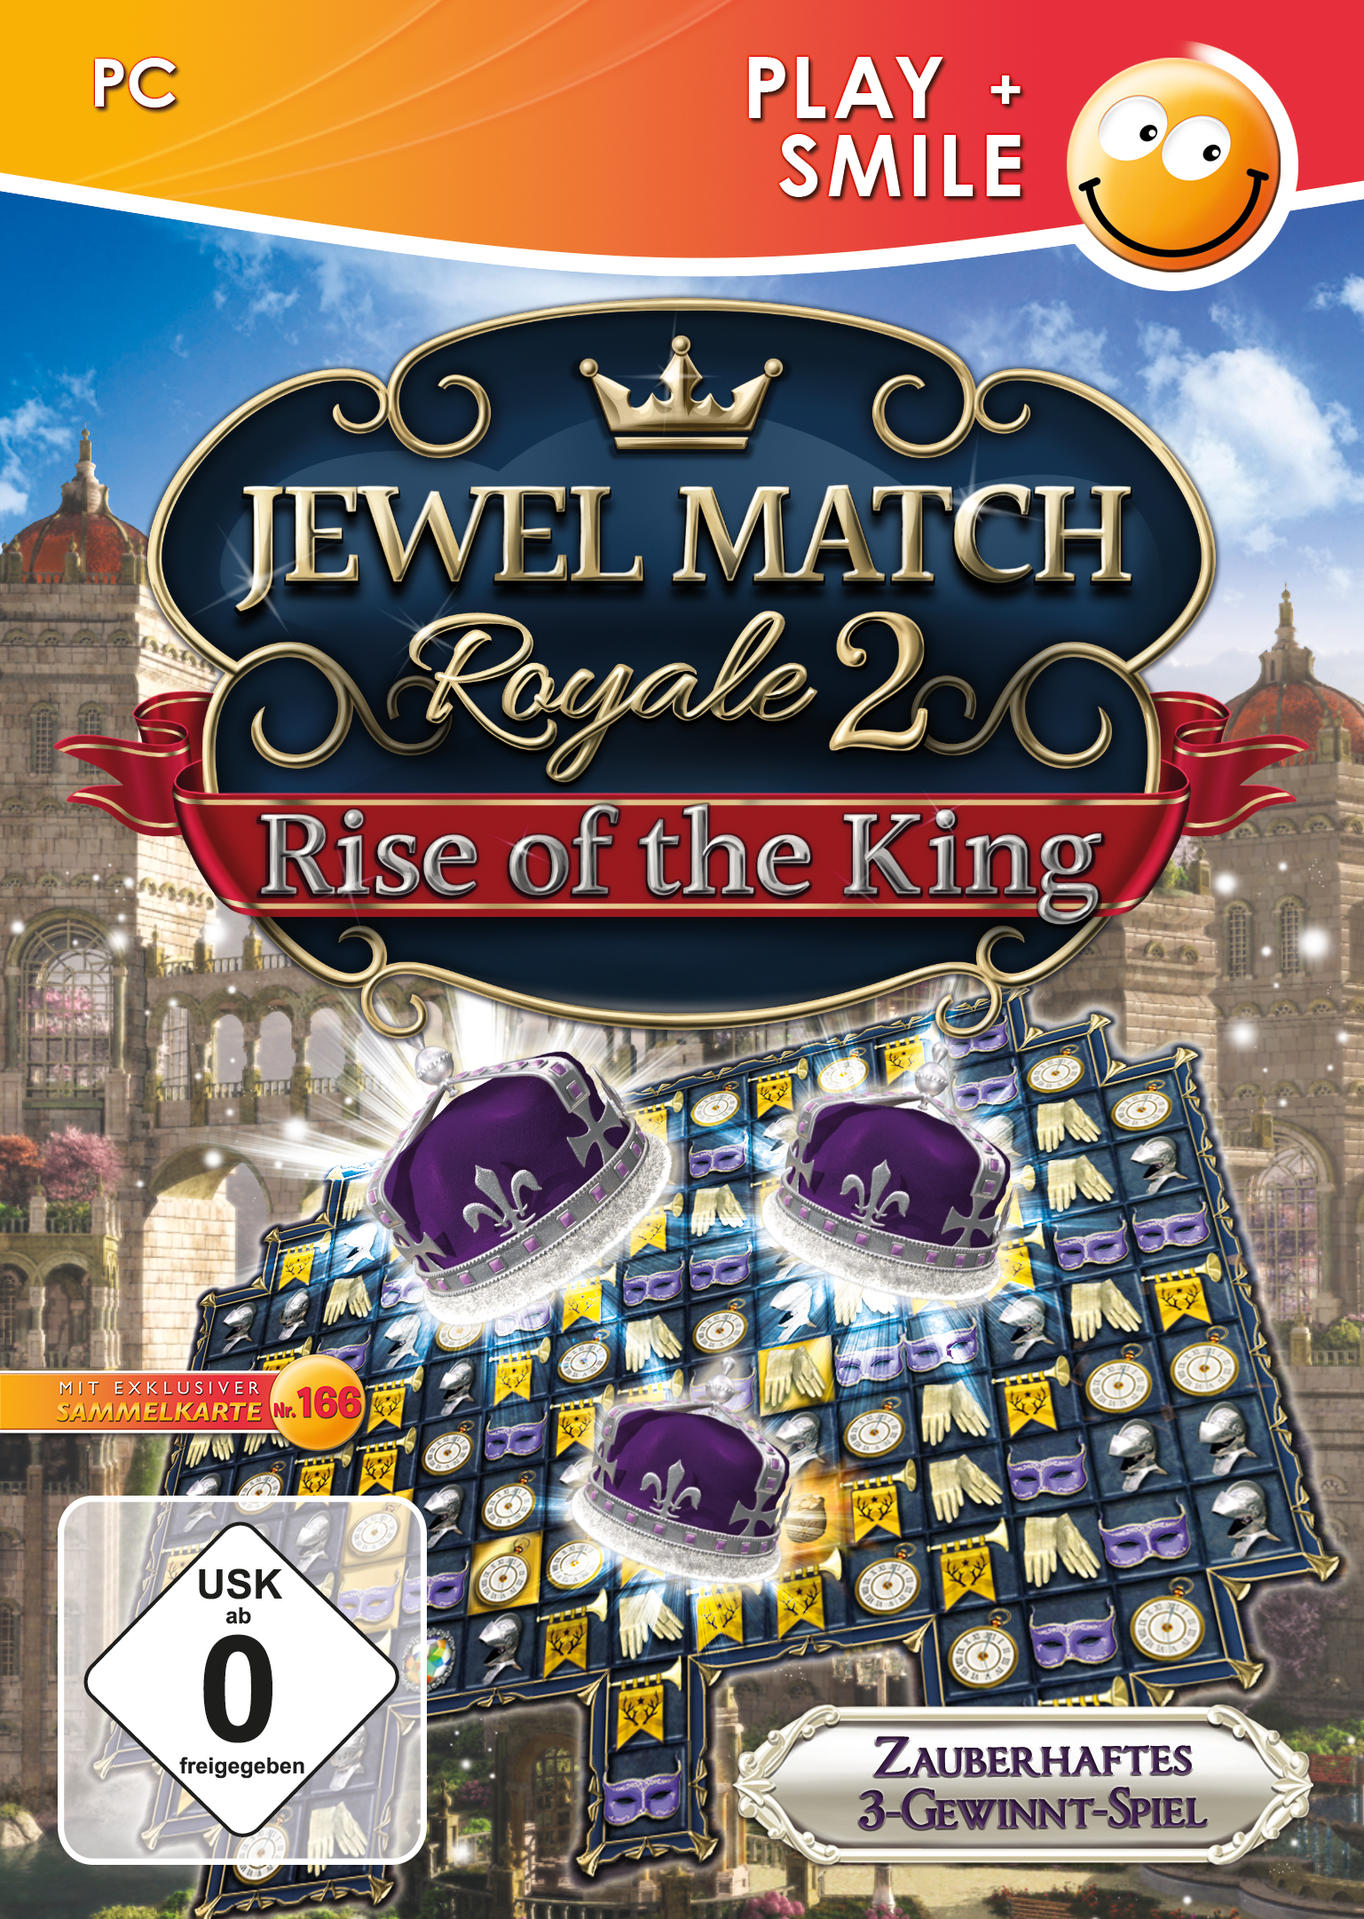 Jewel Match Royale of the - King Rise 2: [PC